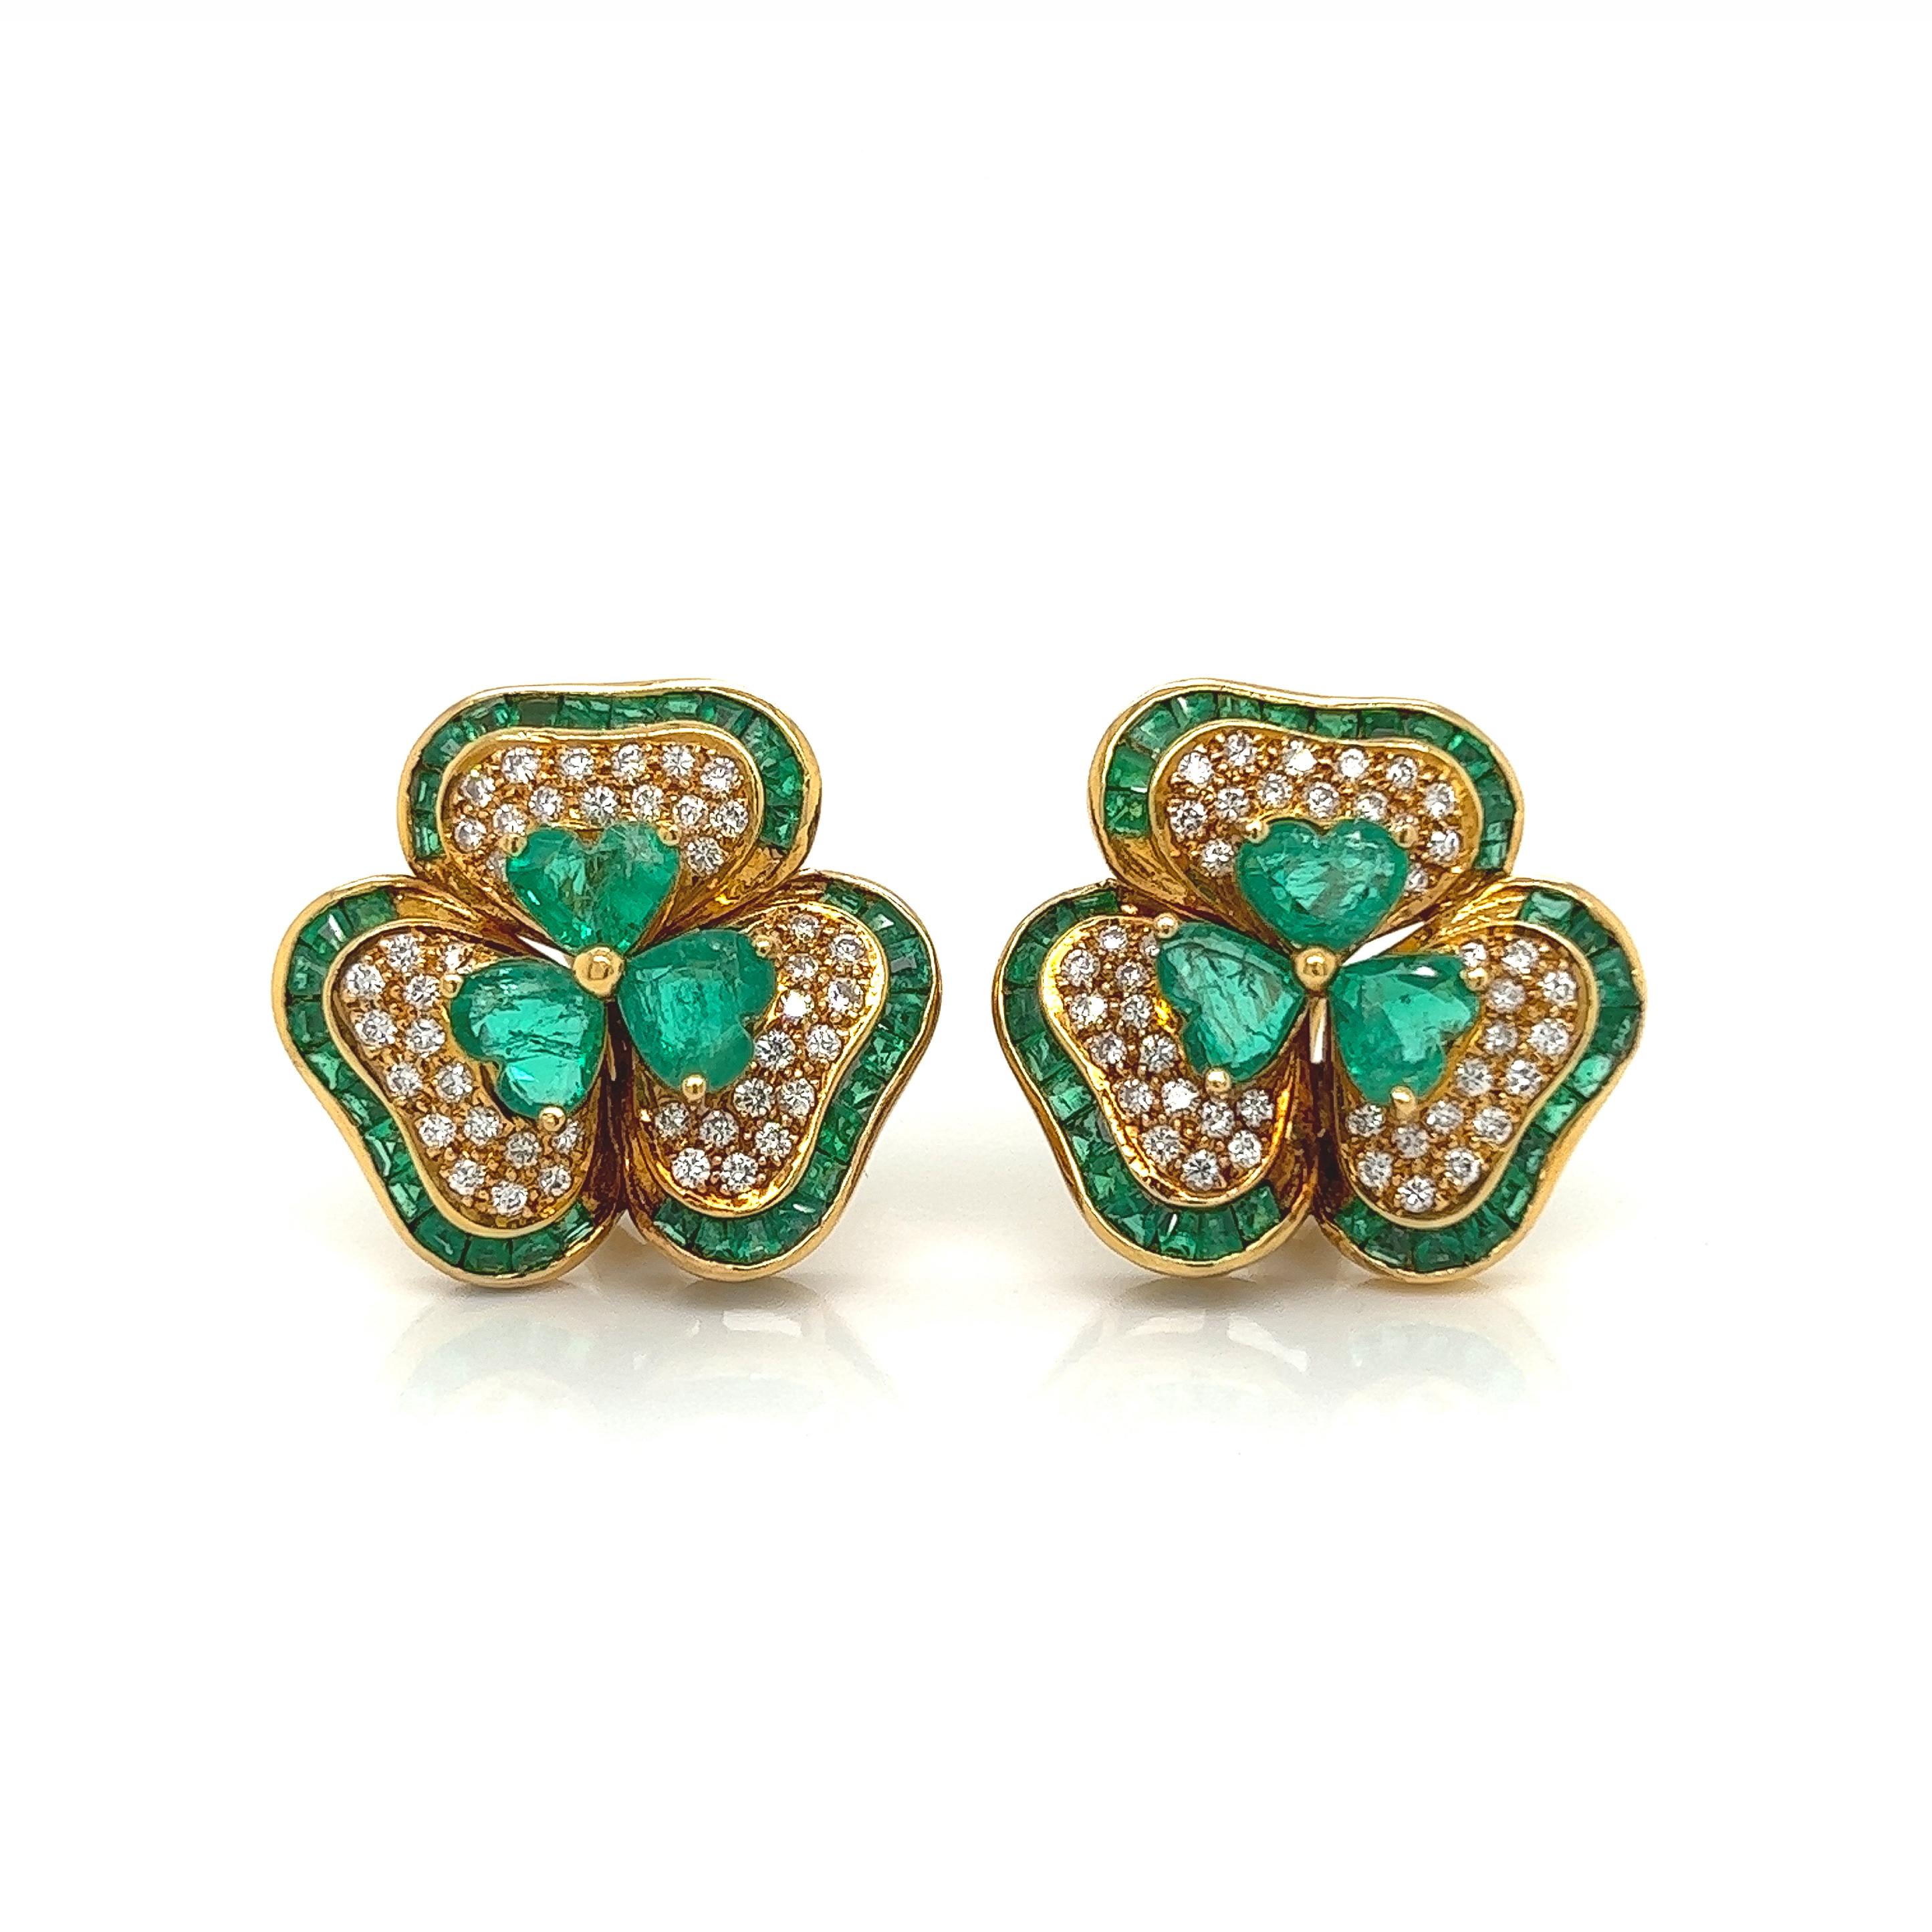 11.55 Total Carat Lucky Clover 18K Yellow Gold Diamond & Colombian Green Emerald Earrings

SPECIFICATIONS:
-Main Emeralds: 7.35ct Colombian Green Emeralds
-Side Emeralds: 3.10ct Chanel Set Emeralds
-Diamonds: 1.10ct Round Brilliant Cut